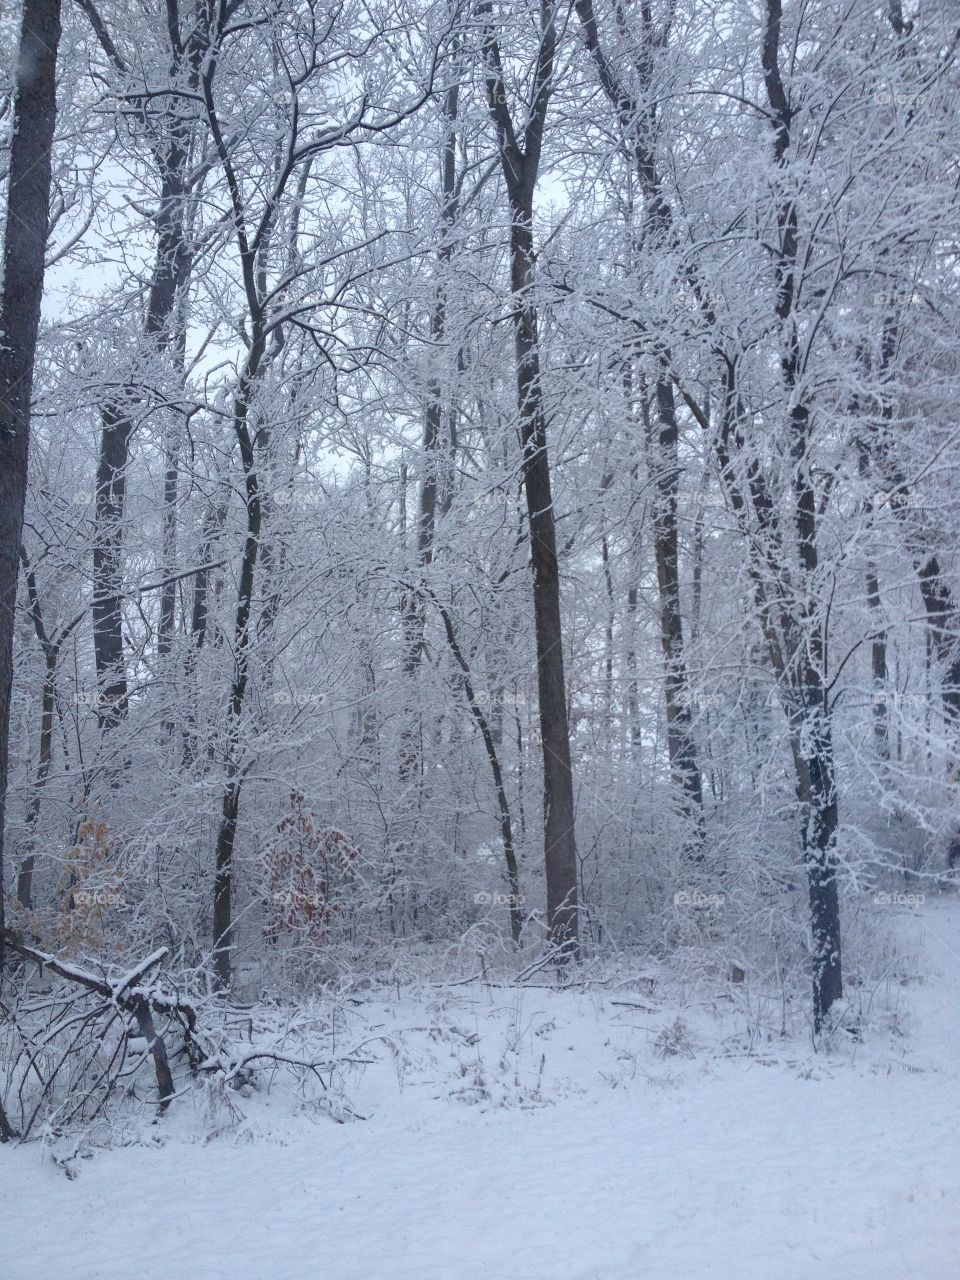 The snow blanketed all the trees in our yard which was very beautiful so I took this photo.